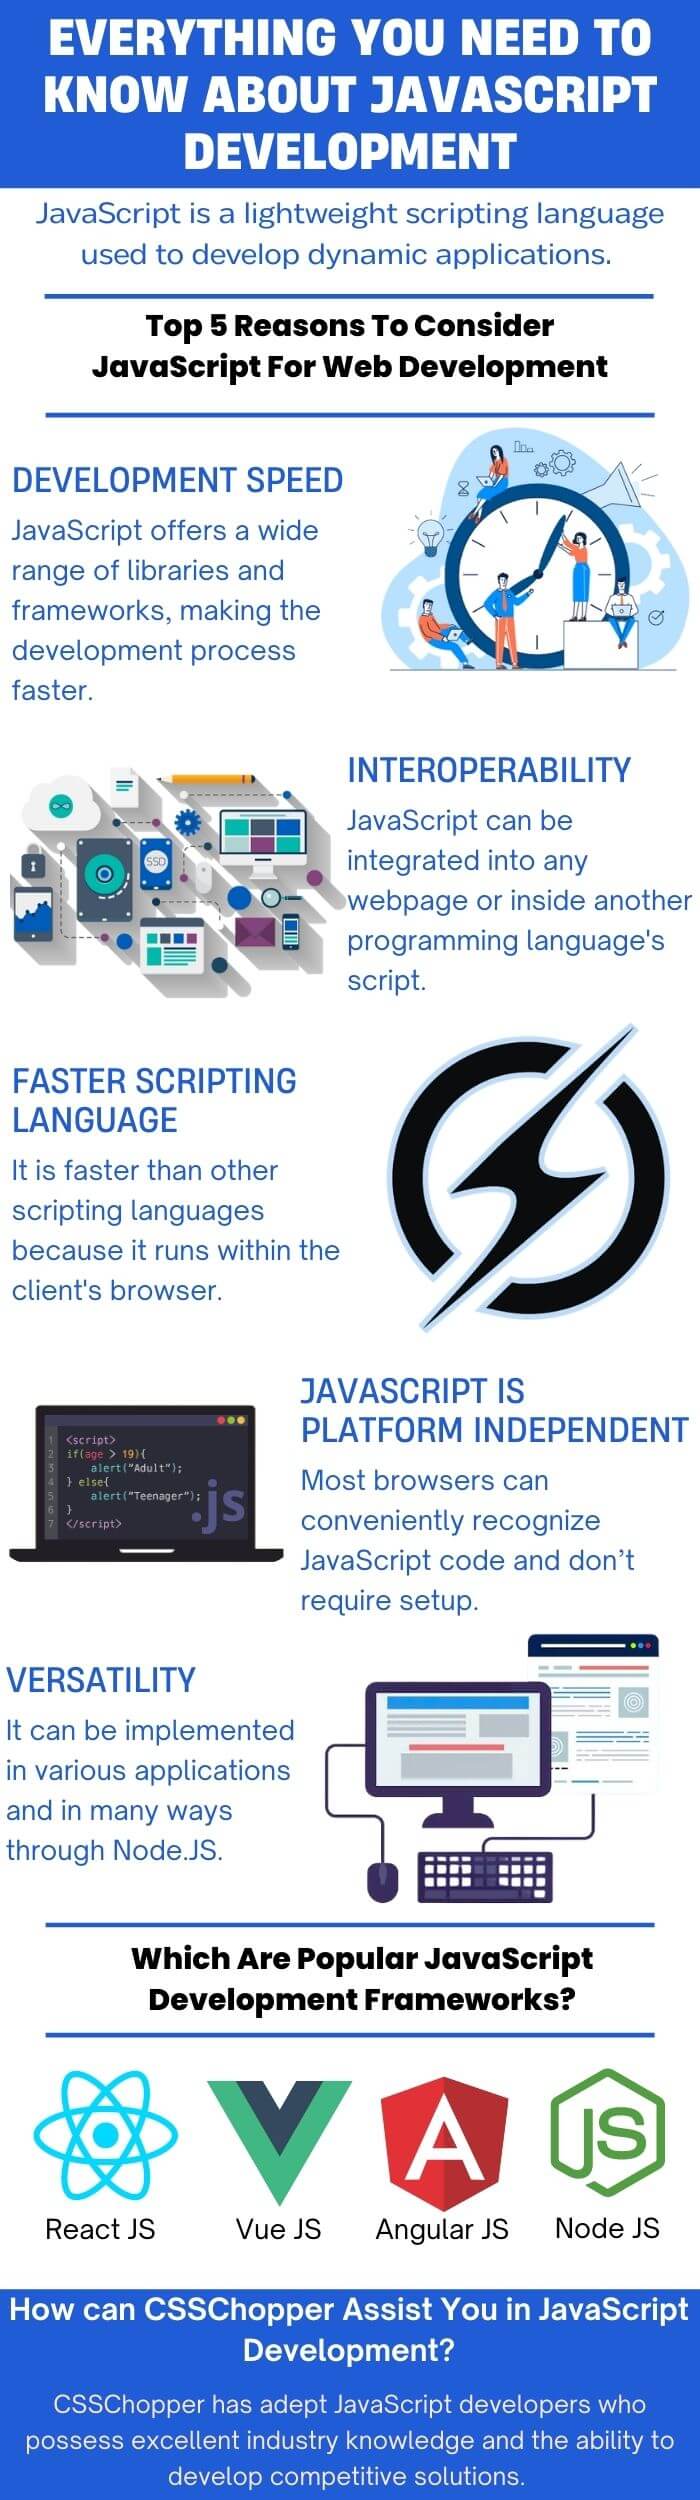 Everything You Need to Know About JavaScript Development